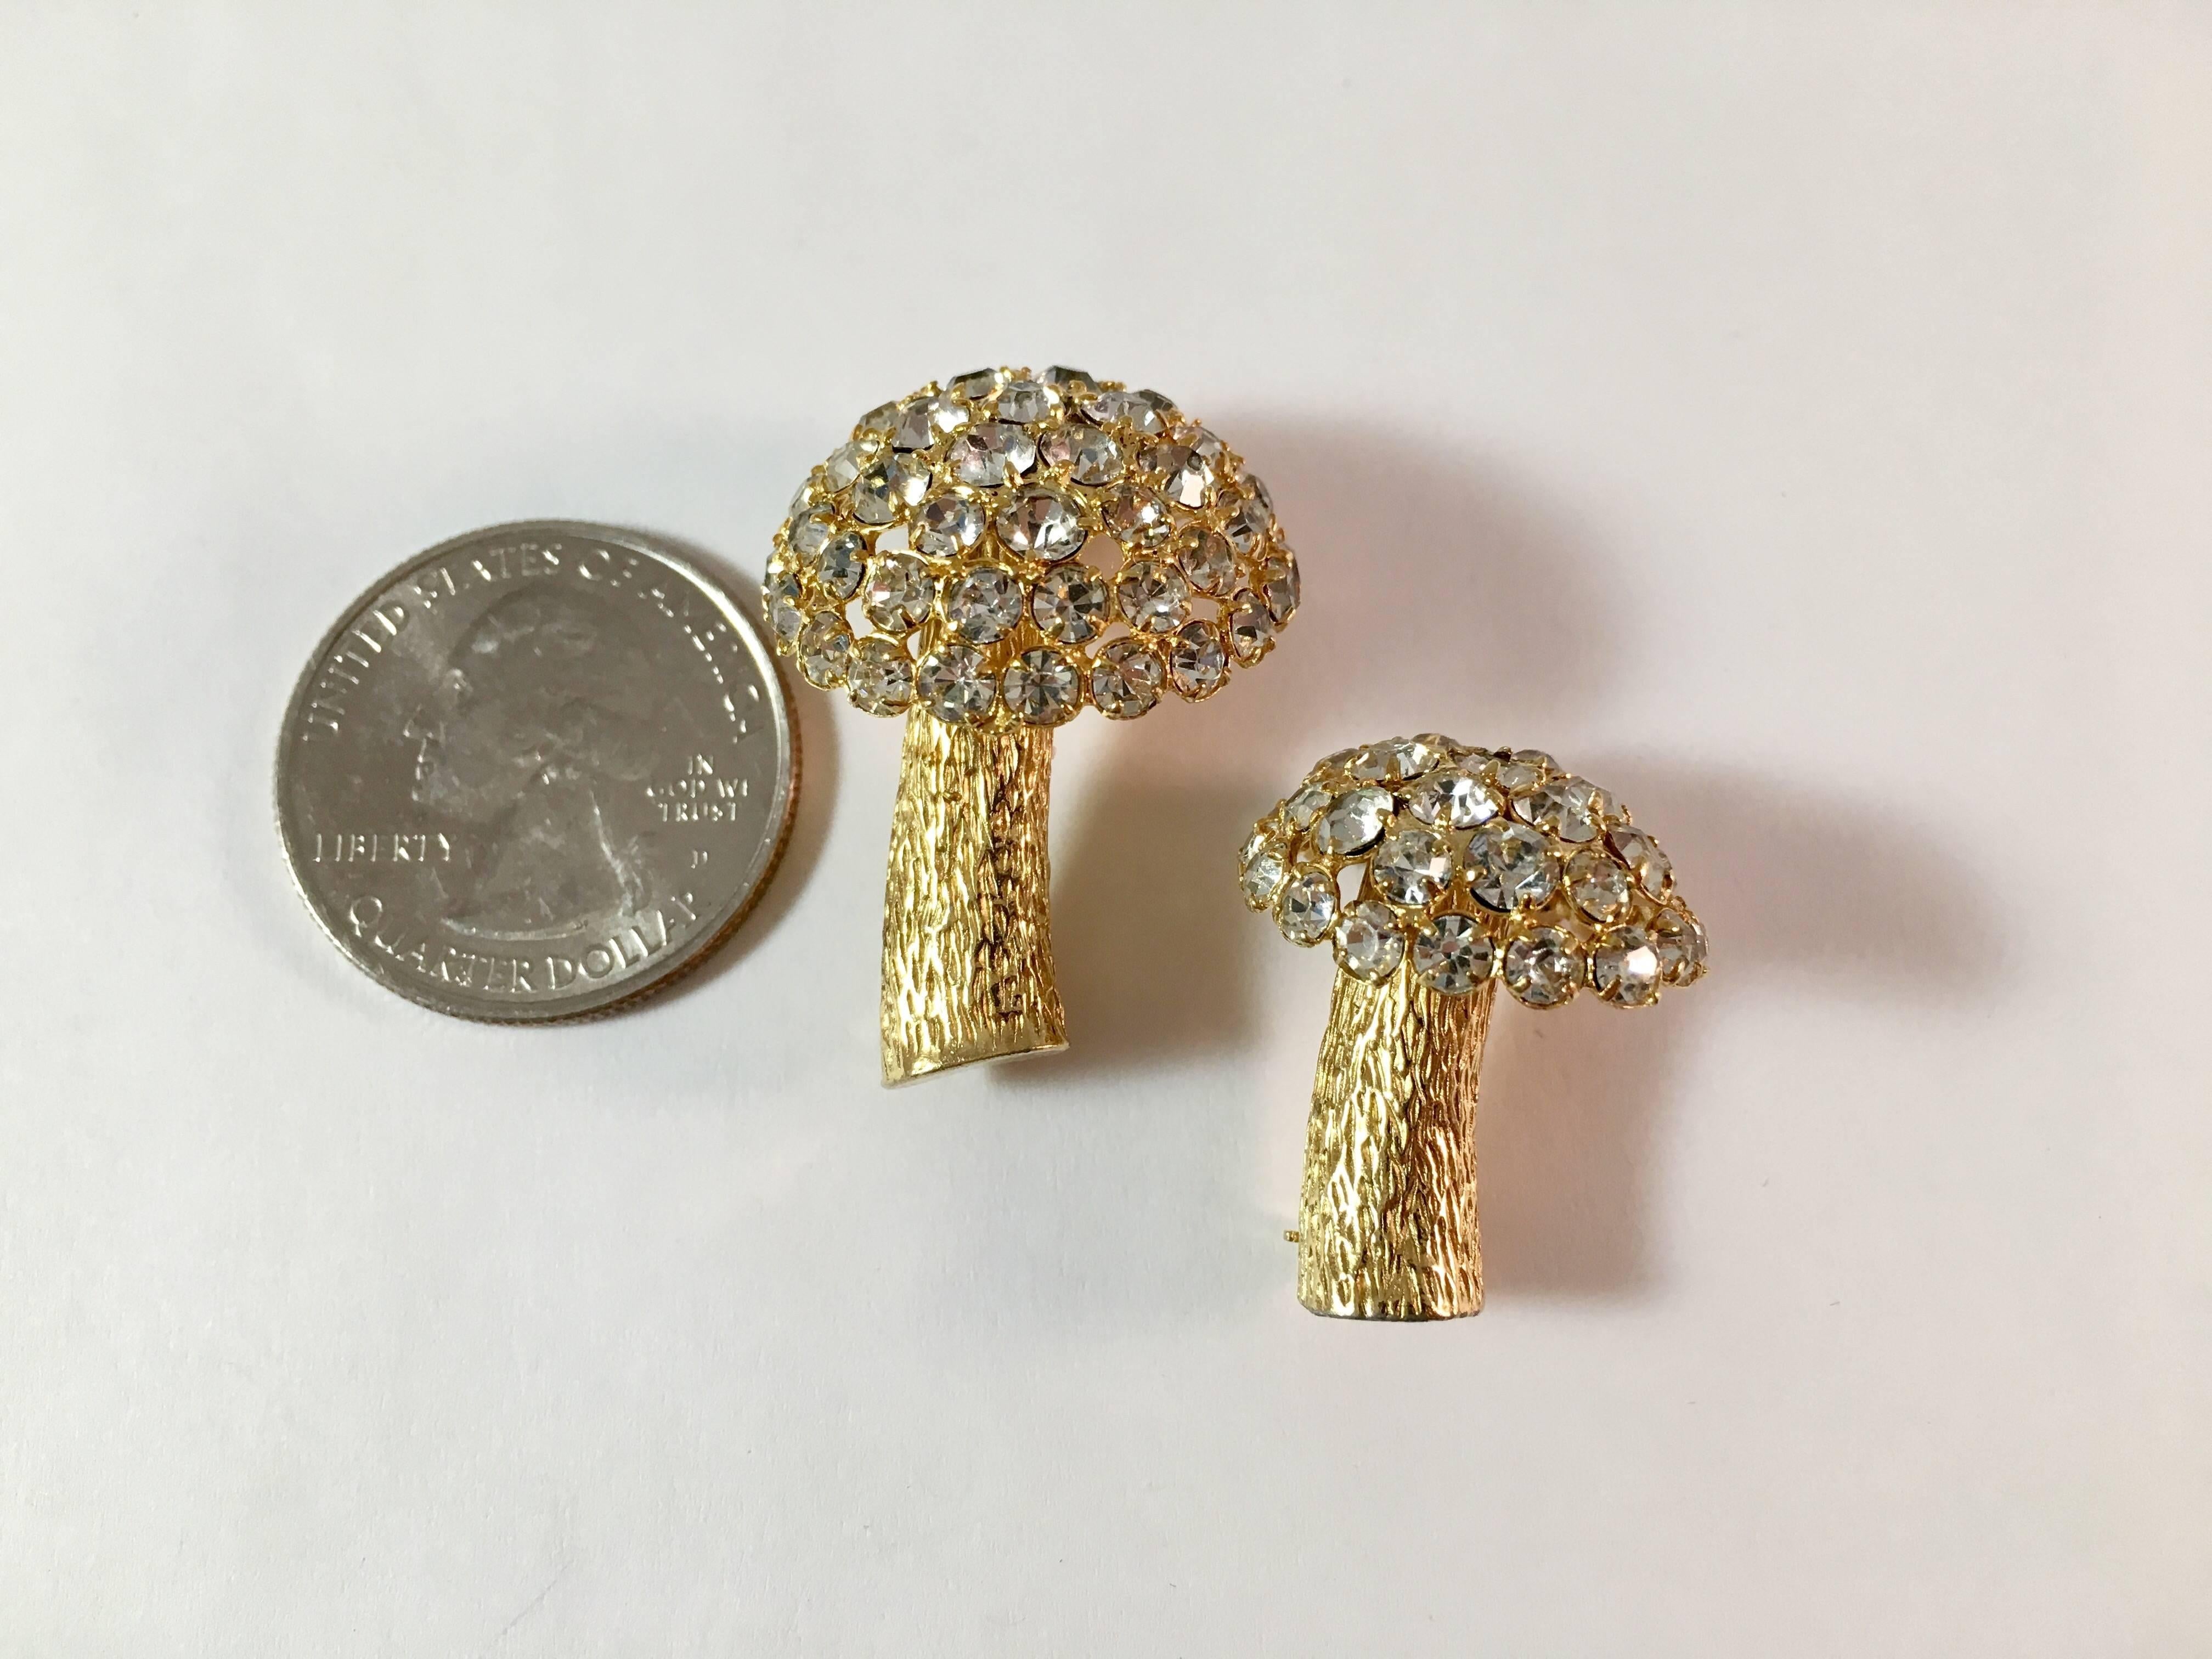 Love these fun 1960s mushroom brooches from Castlecliff. They are made up of clear rhinestones set in a goldtone metal. One is slightly larger than the other, measuring 1 1/4" tall x 1" wide. The other measures 1"tall x 3/4"wide.